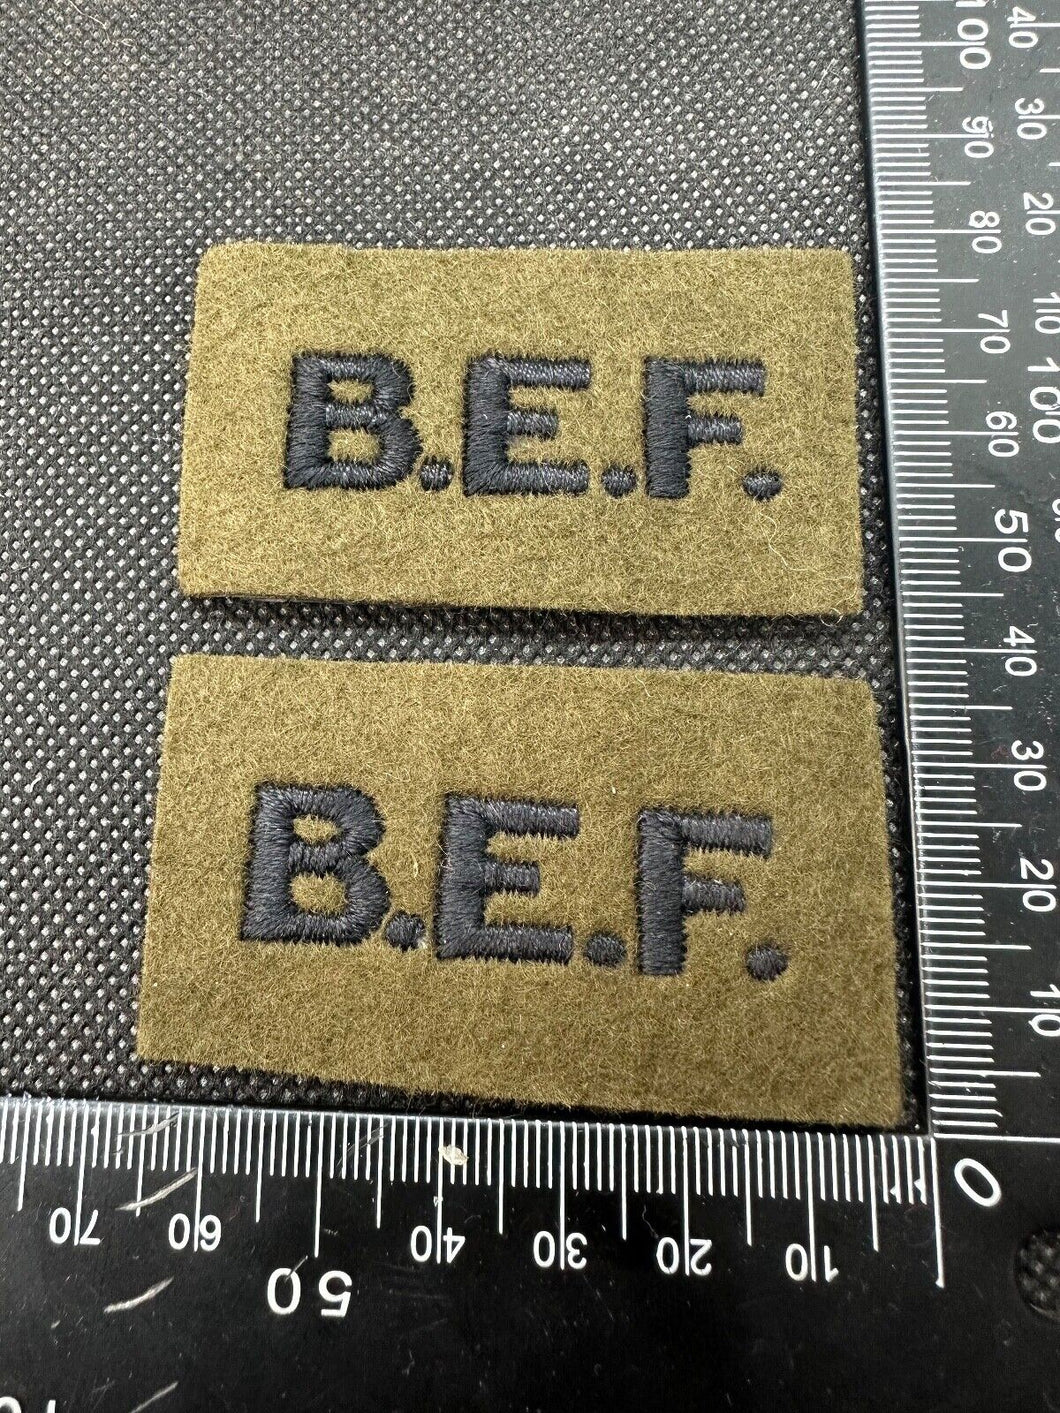 British Expeditionary Force British Army Shoulder Titles - Nice Reproduction